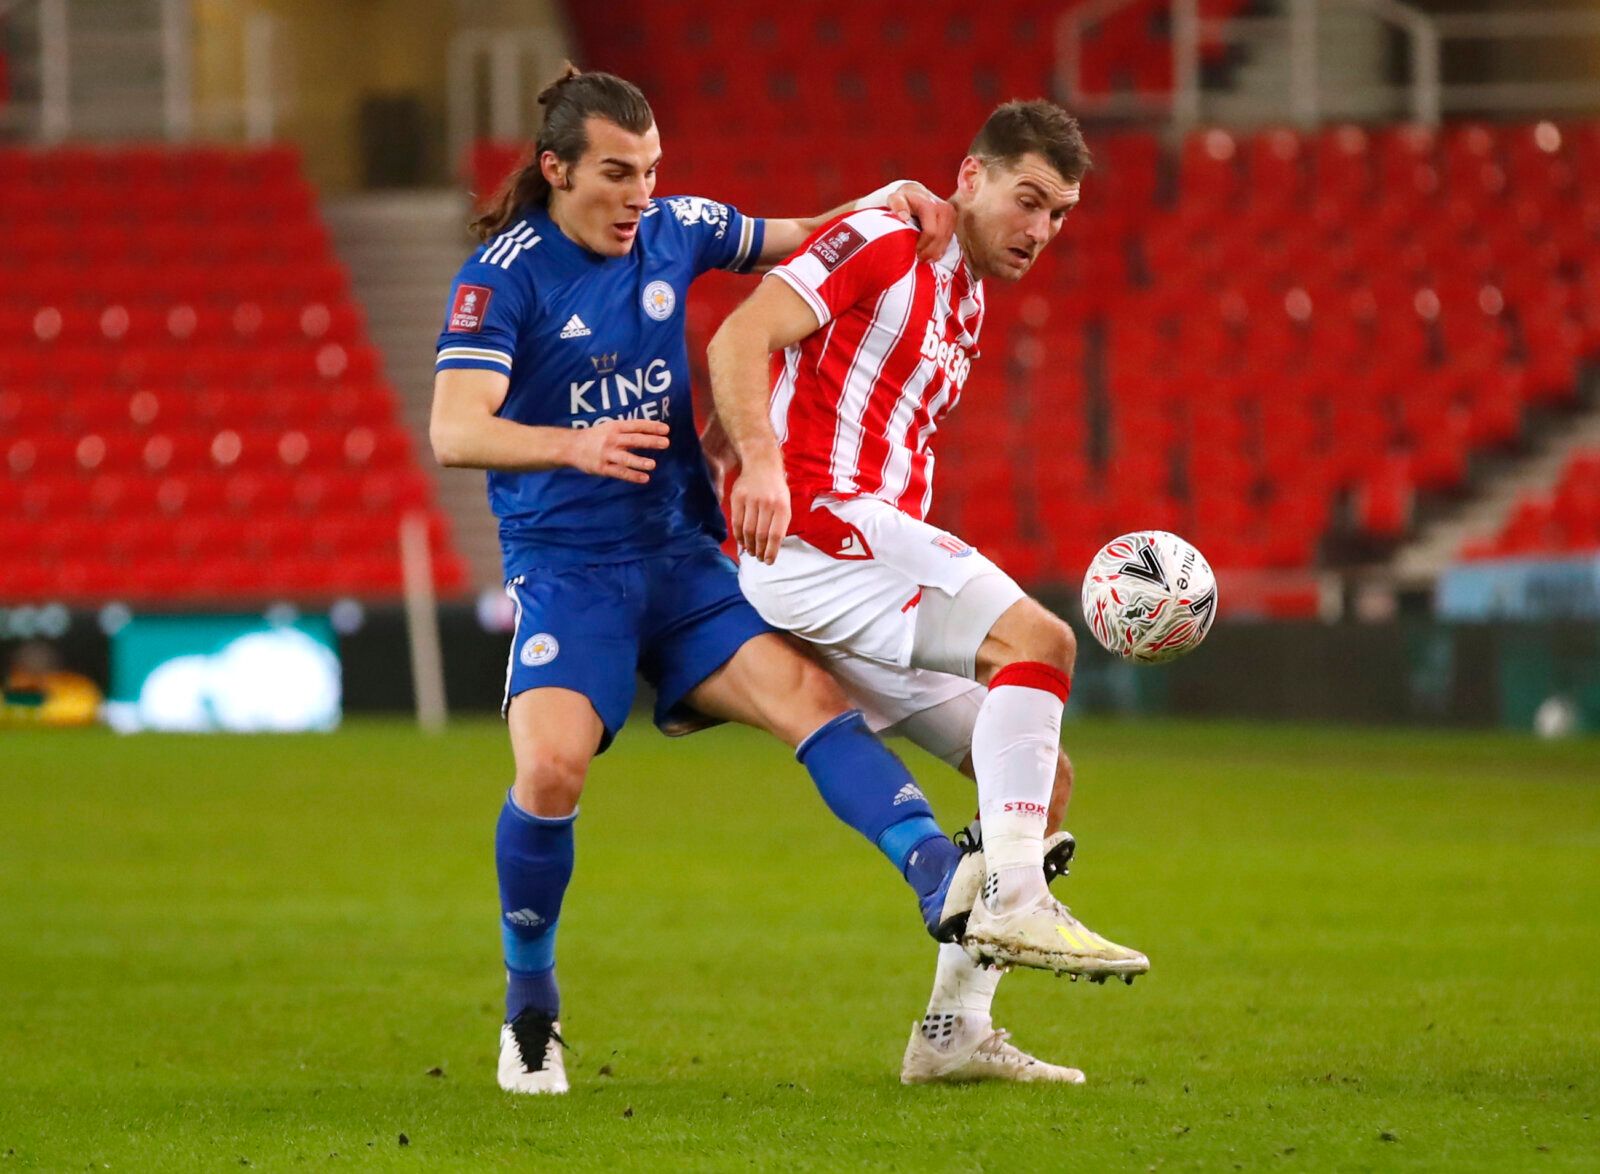 Soccer Football - FA Cup - Third Round - Stoke City v Leicester City - bet365 Stadium, Stoke-On-Trent, Britain - January 9, 2021 Leicester City's Caglar Soyuncu in action with Stoke City's Sam Vokes Action Images via Reuters/Andrew Boyers